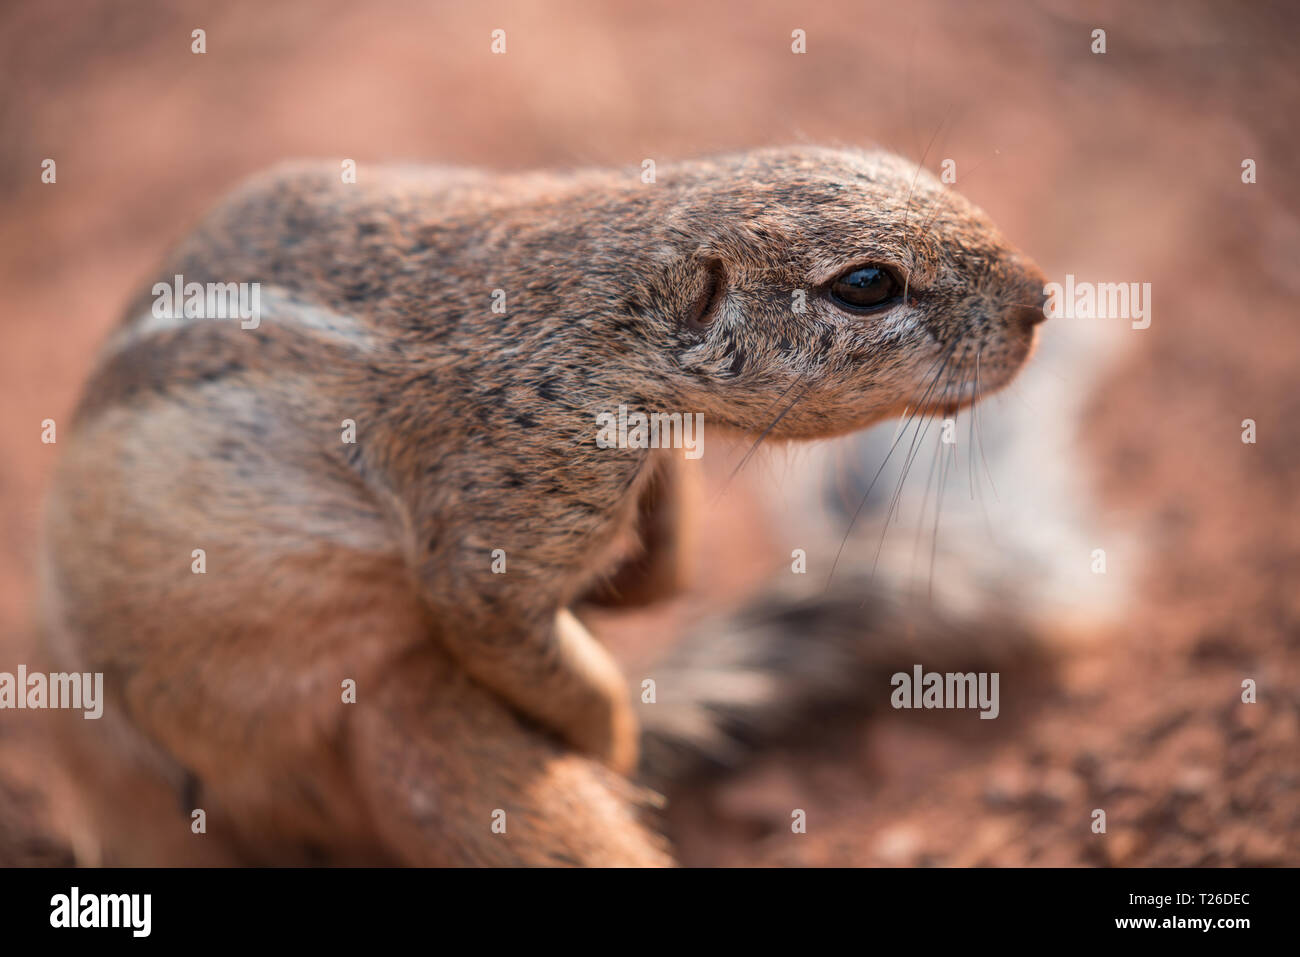 Closeup of an African Ground Squirrel (xerus scuiridae) twisted in action and looking at the camera, against a red soil background, South Africa Stock Photo